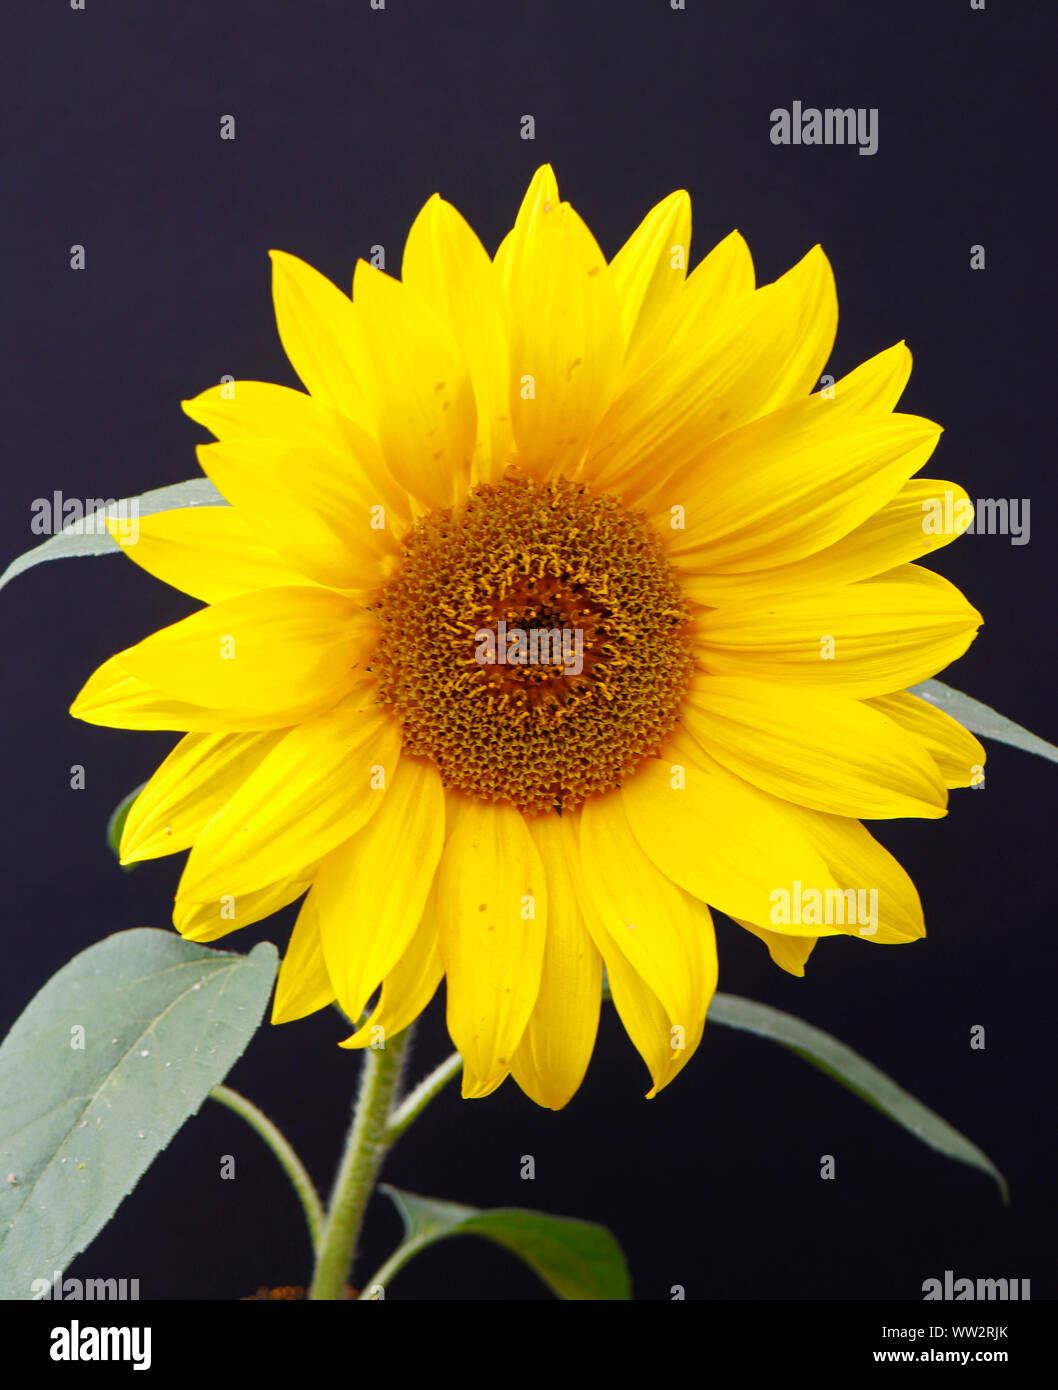 A sunflower blossom photographed against a black background. Stock Photo